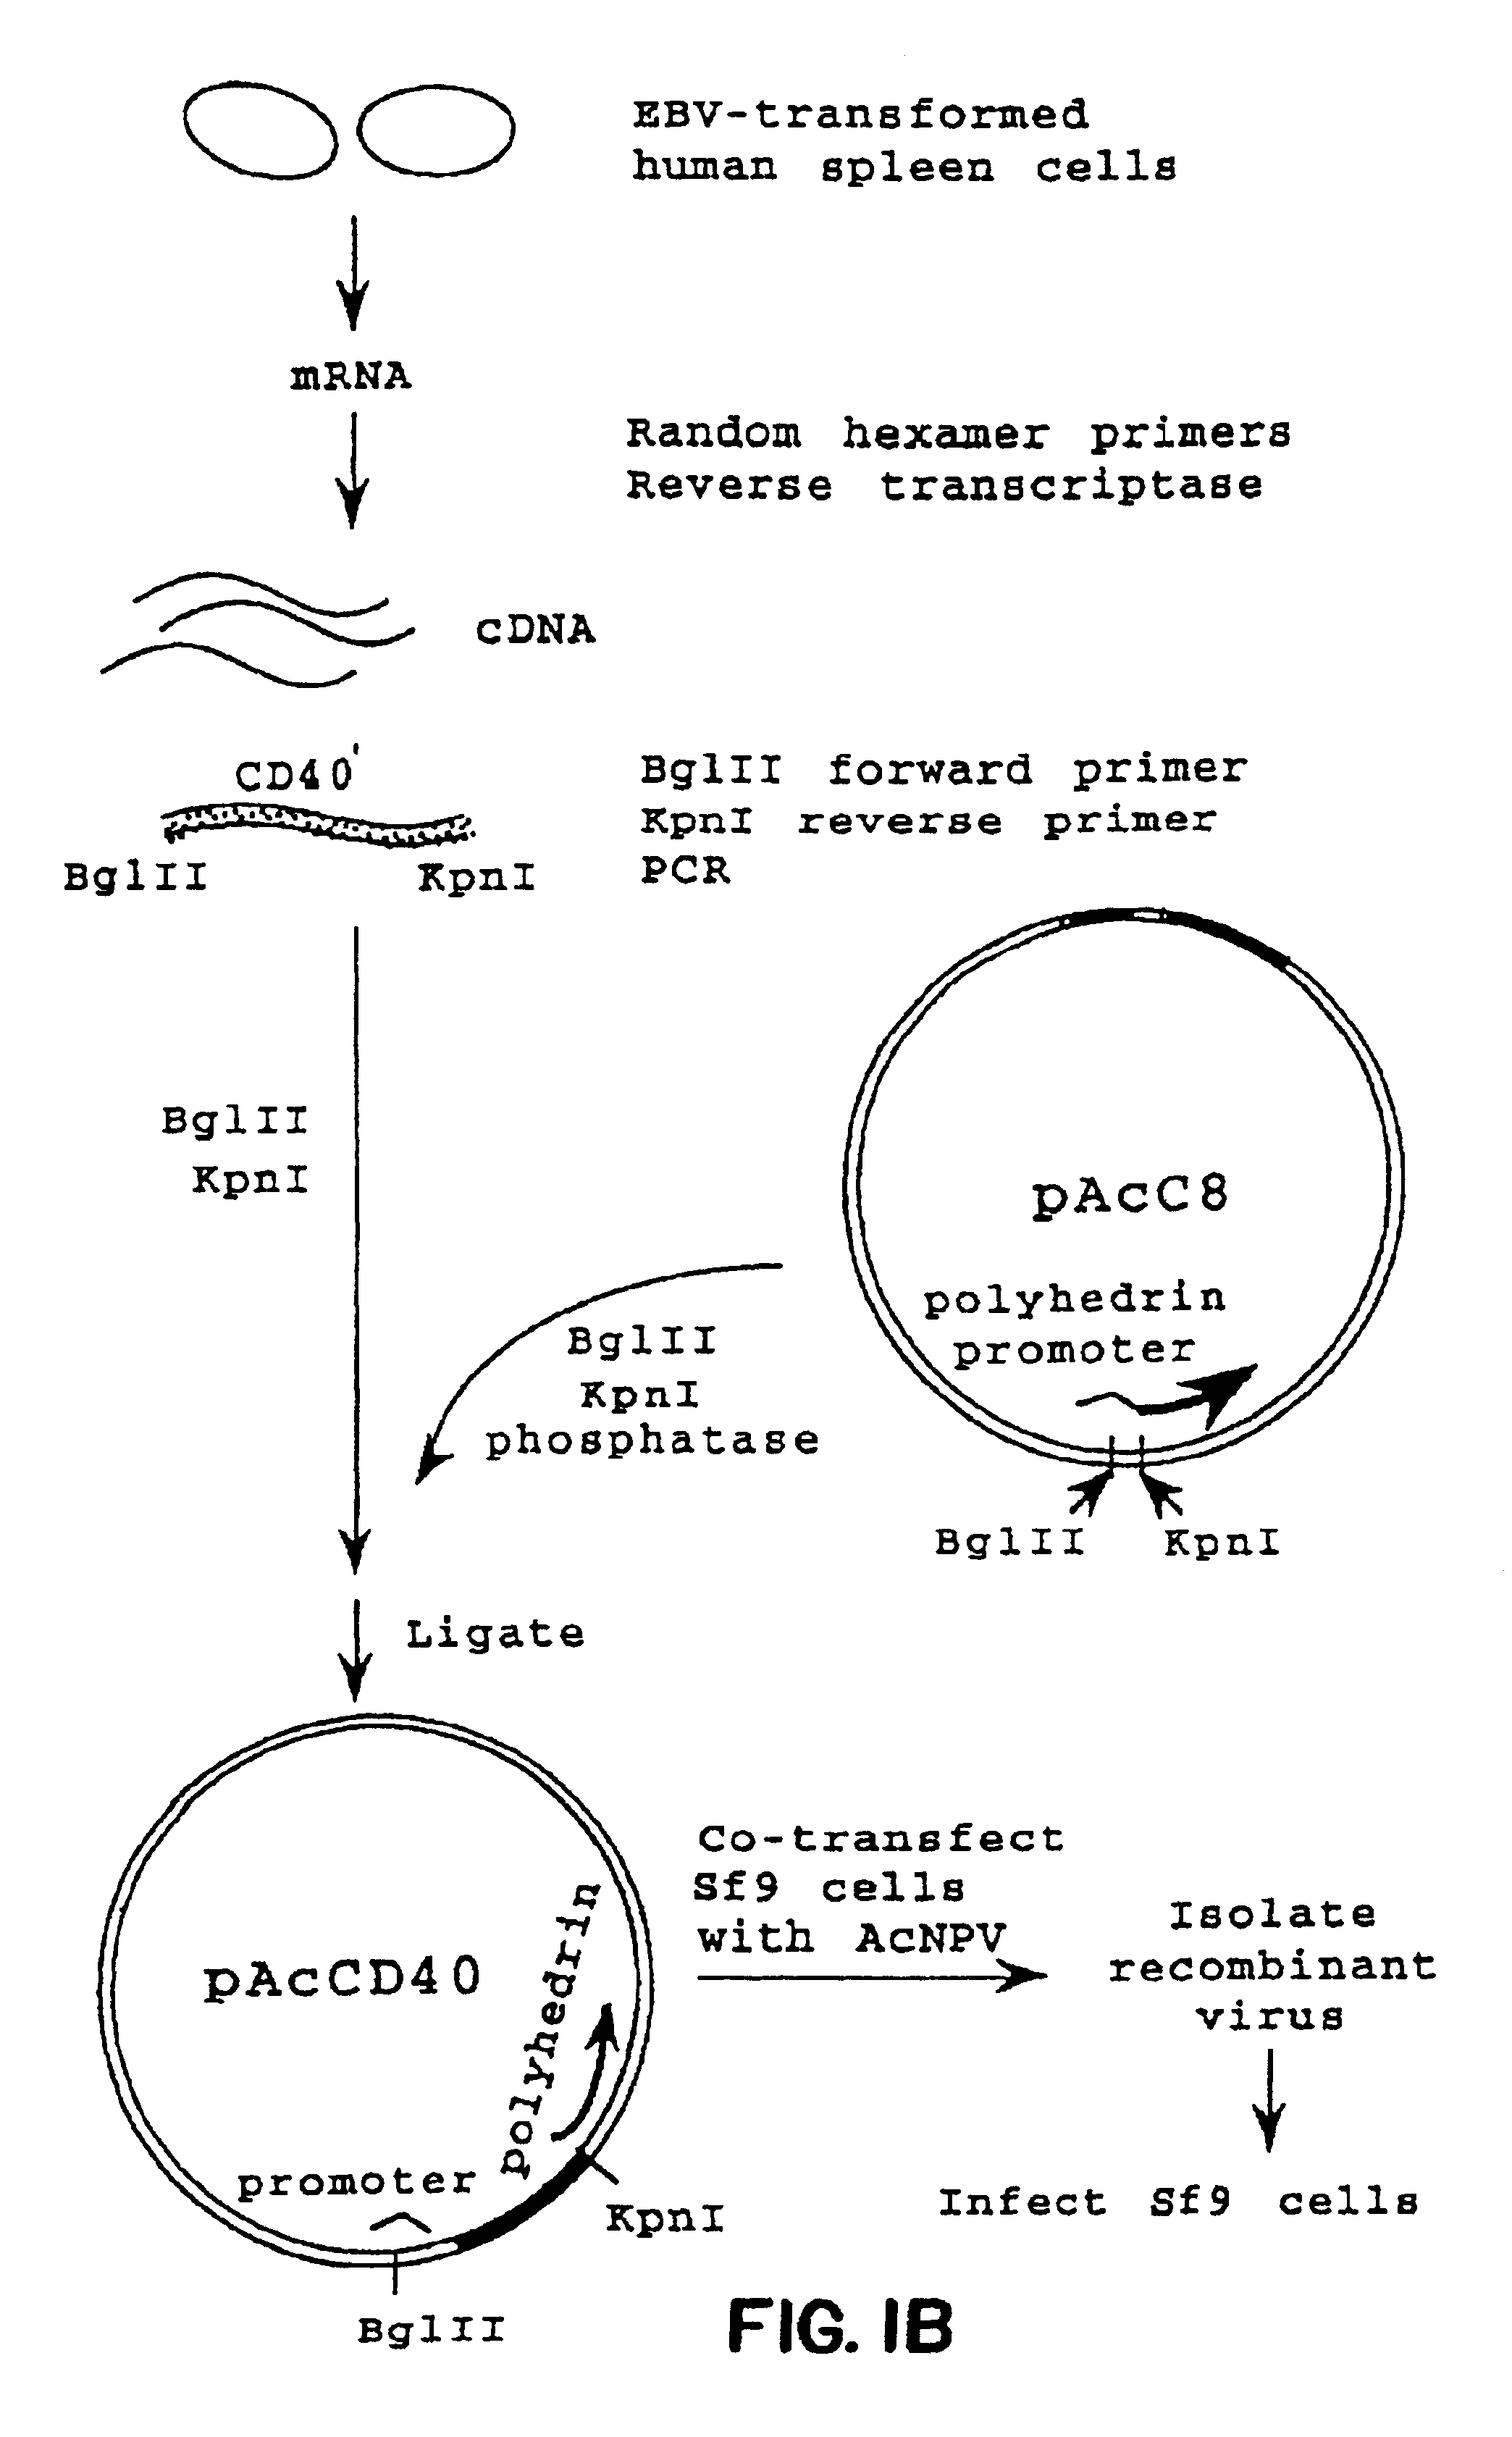 Method for treating an IgE-mediated disease in a patient using anti-CD40 monoclonal antibodies